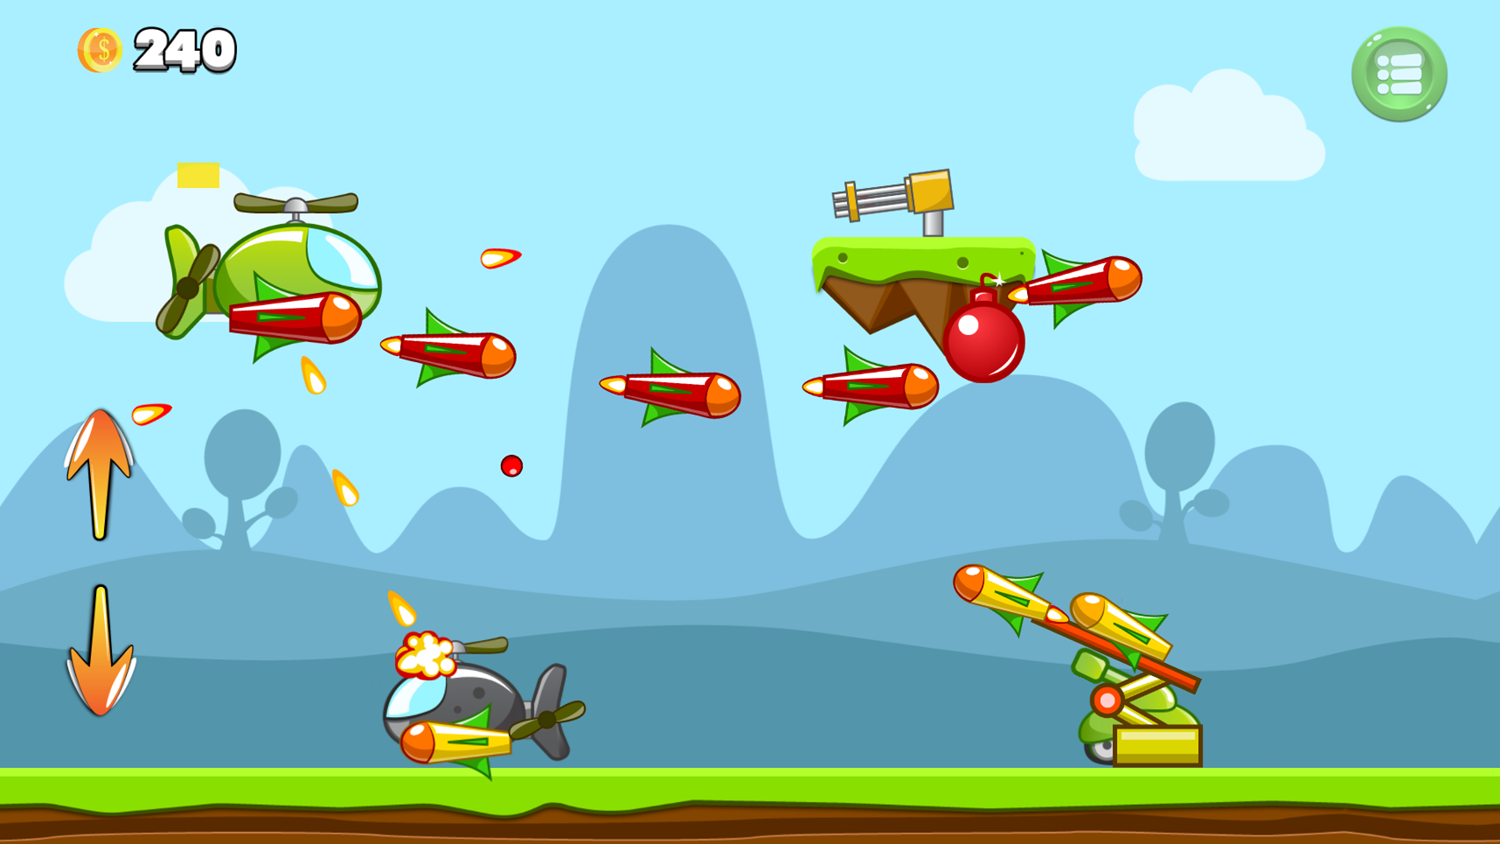 Copter Attack Game Play Screenshot.